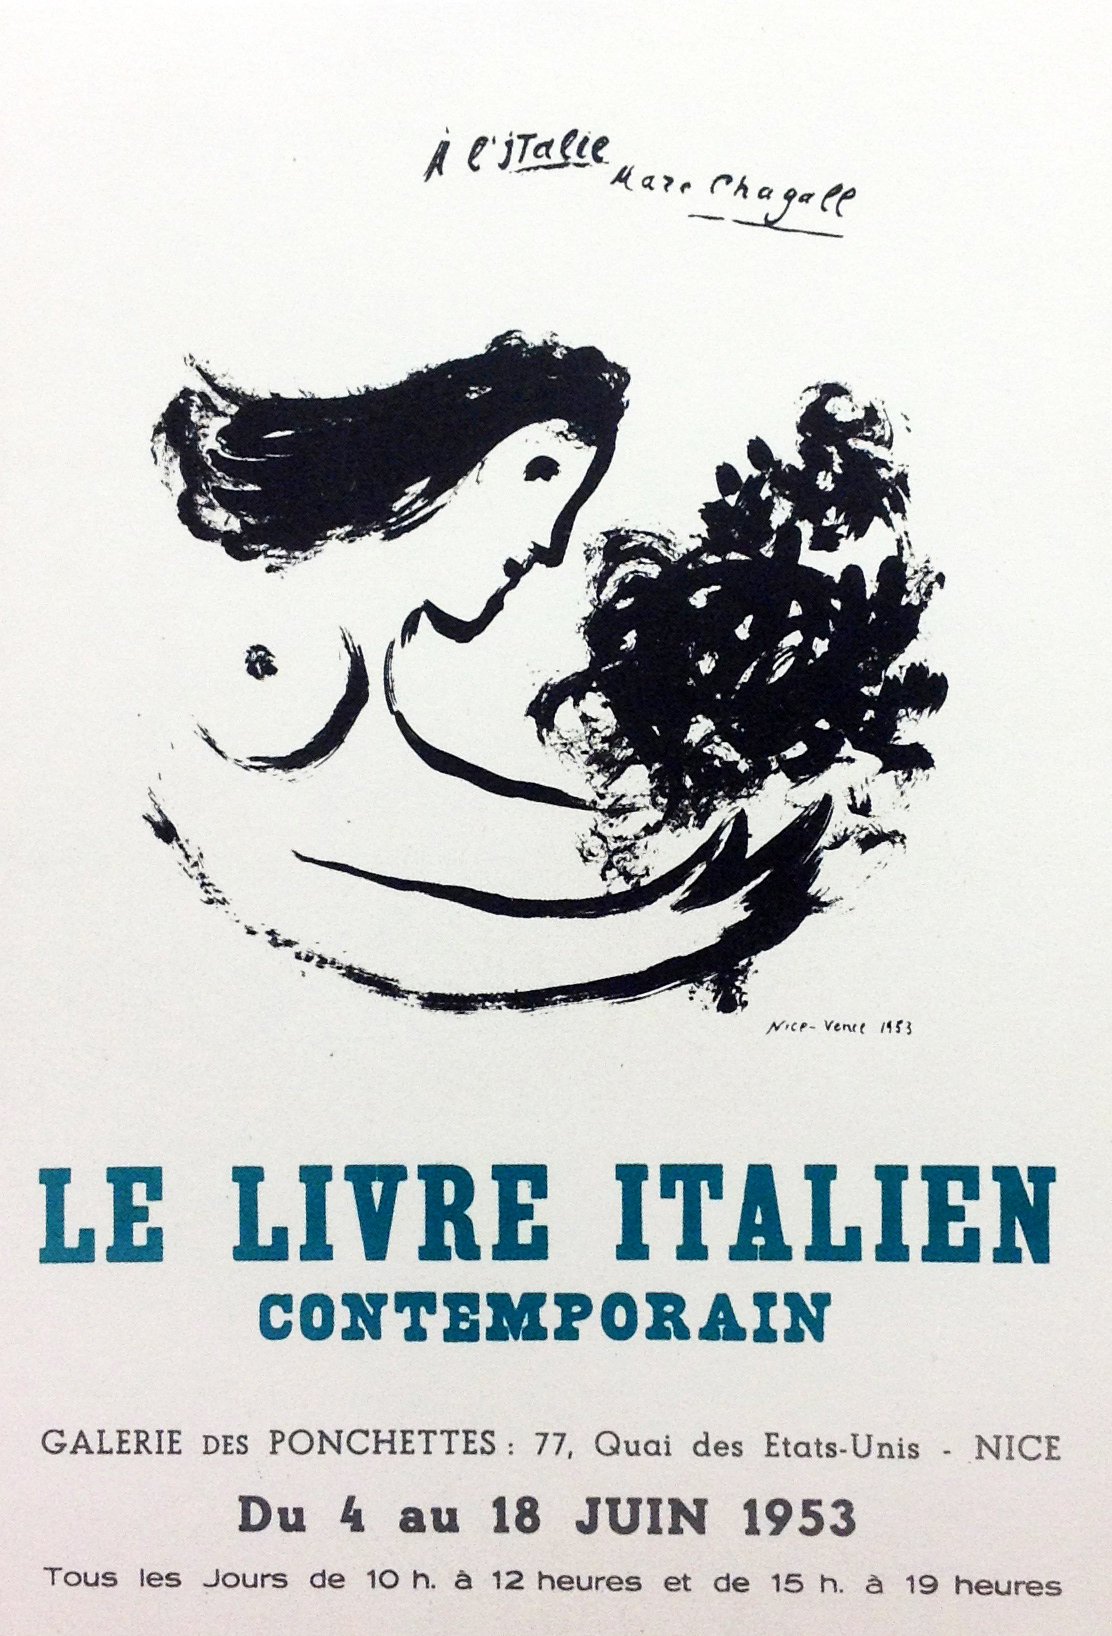 Chagall Lithograph 19, Le livre Italien, Art in posters